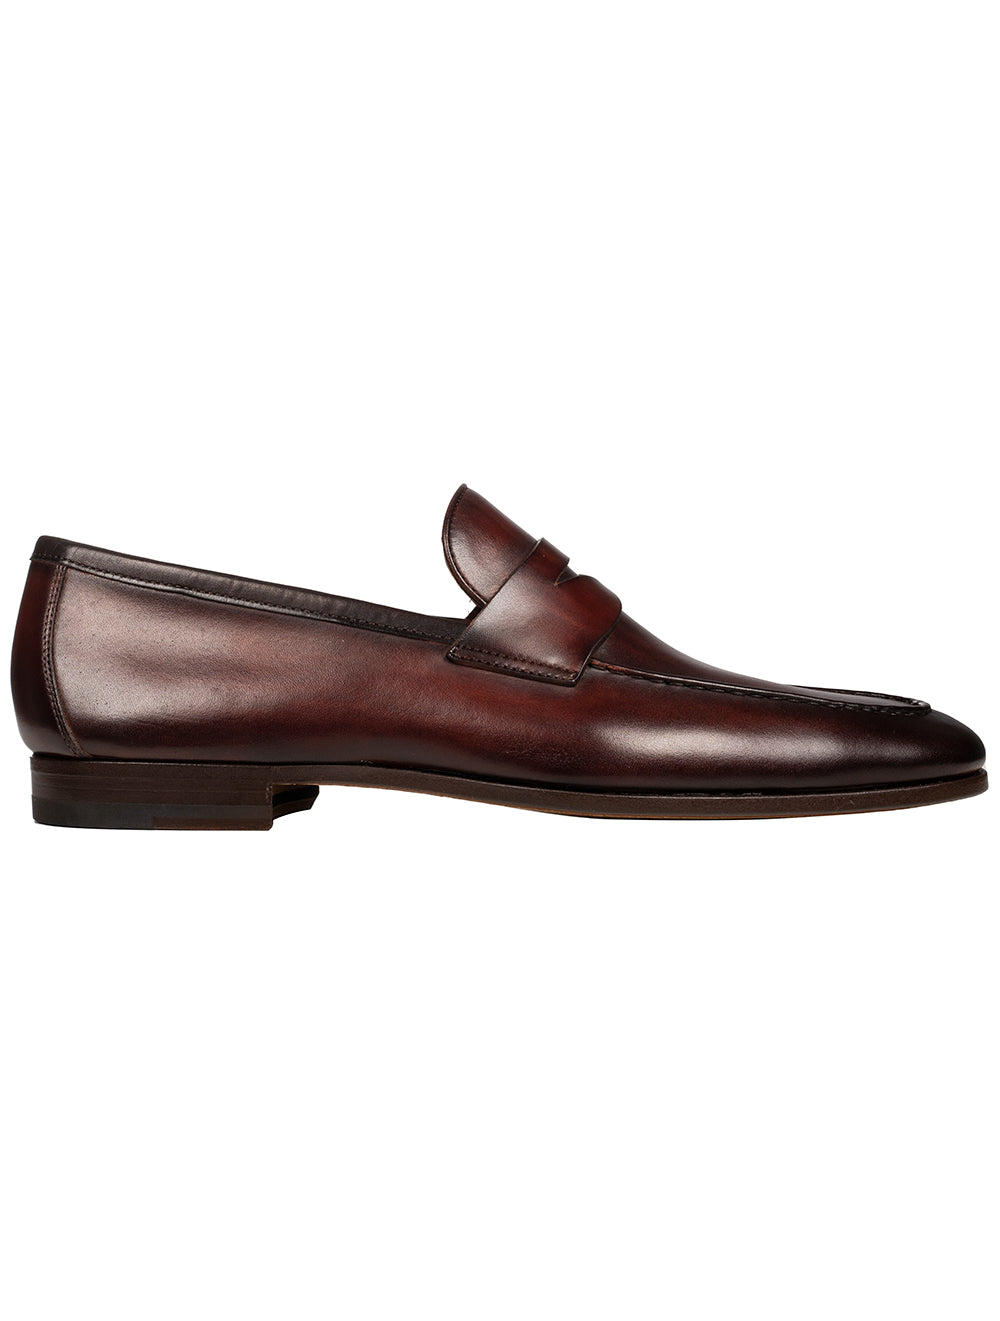 Leather Slip On Shoes Midbrown